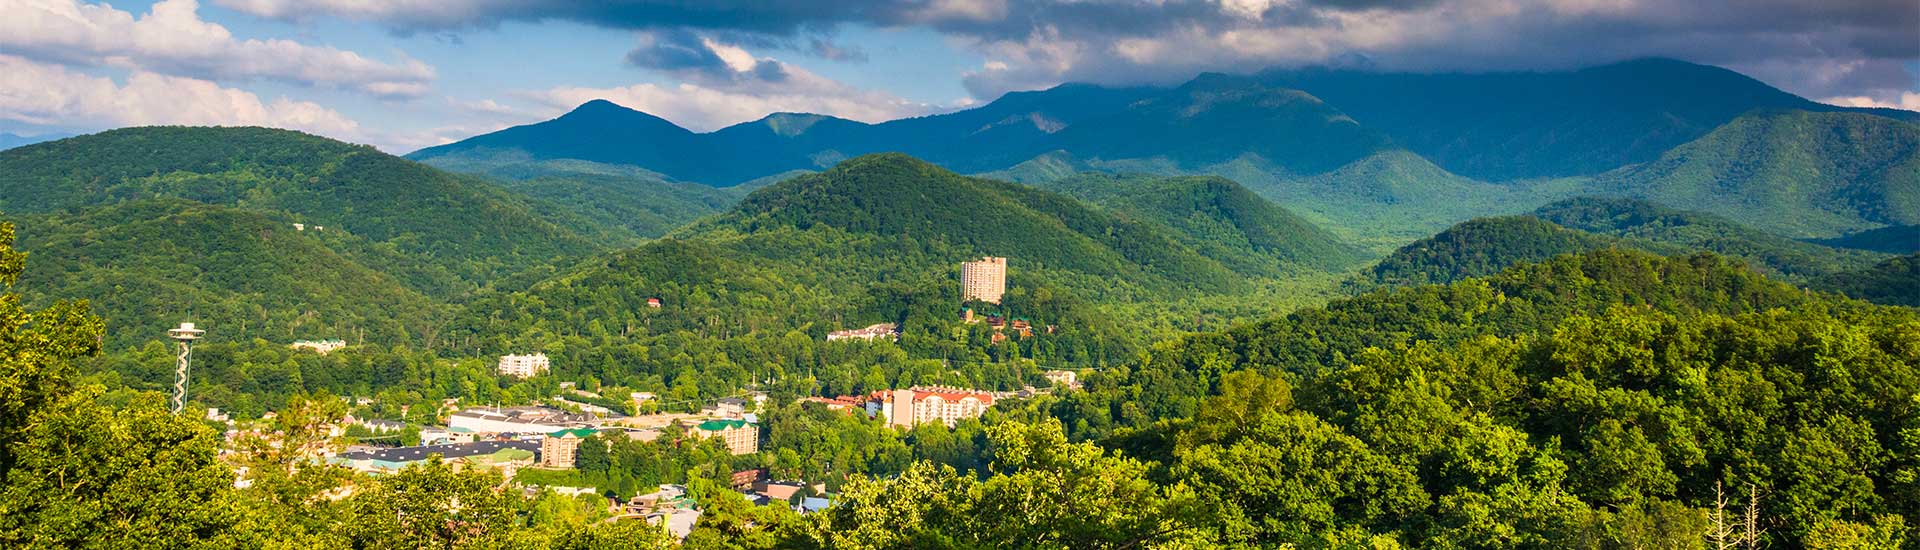 Beautiful summertime view of Gatlinburg from the Foothills Parkway, Great Smoky Mountains National Park.